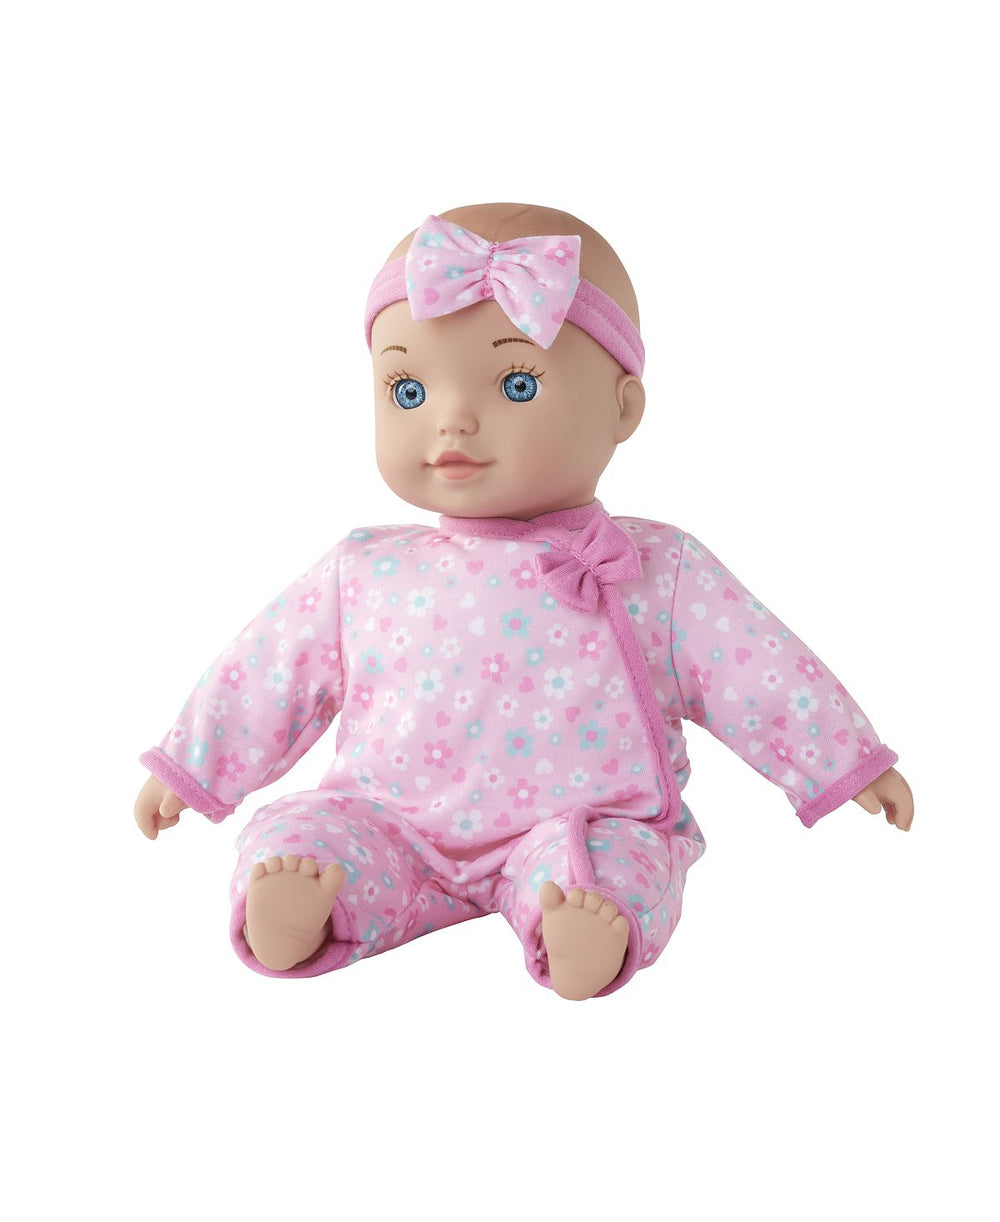 Toys R Us Chatter Coo 12 inch Interactive Baby Doll - Pink Floral Sleeper